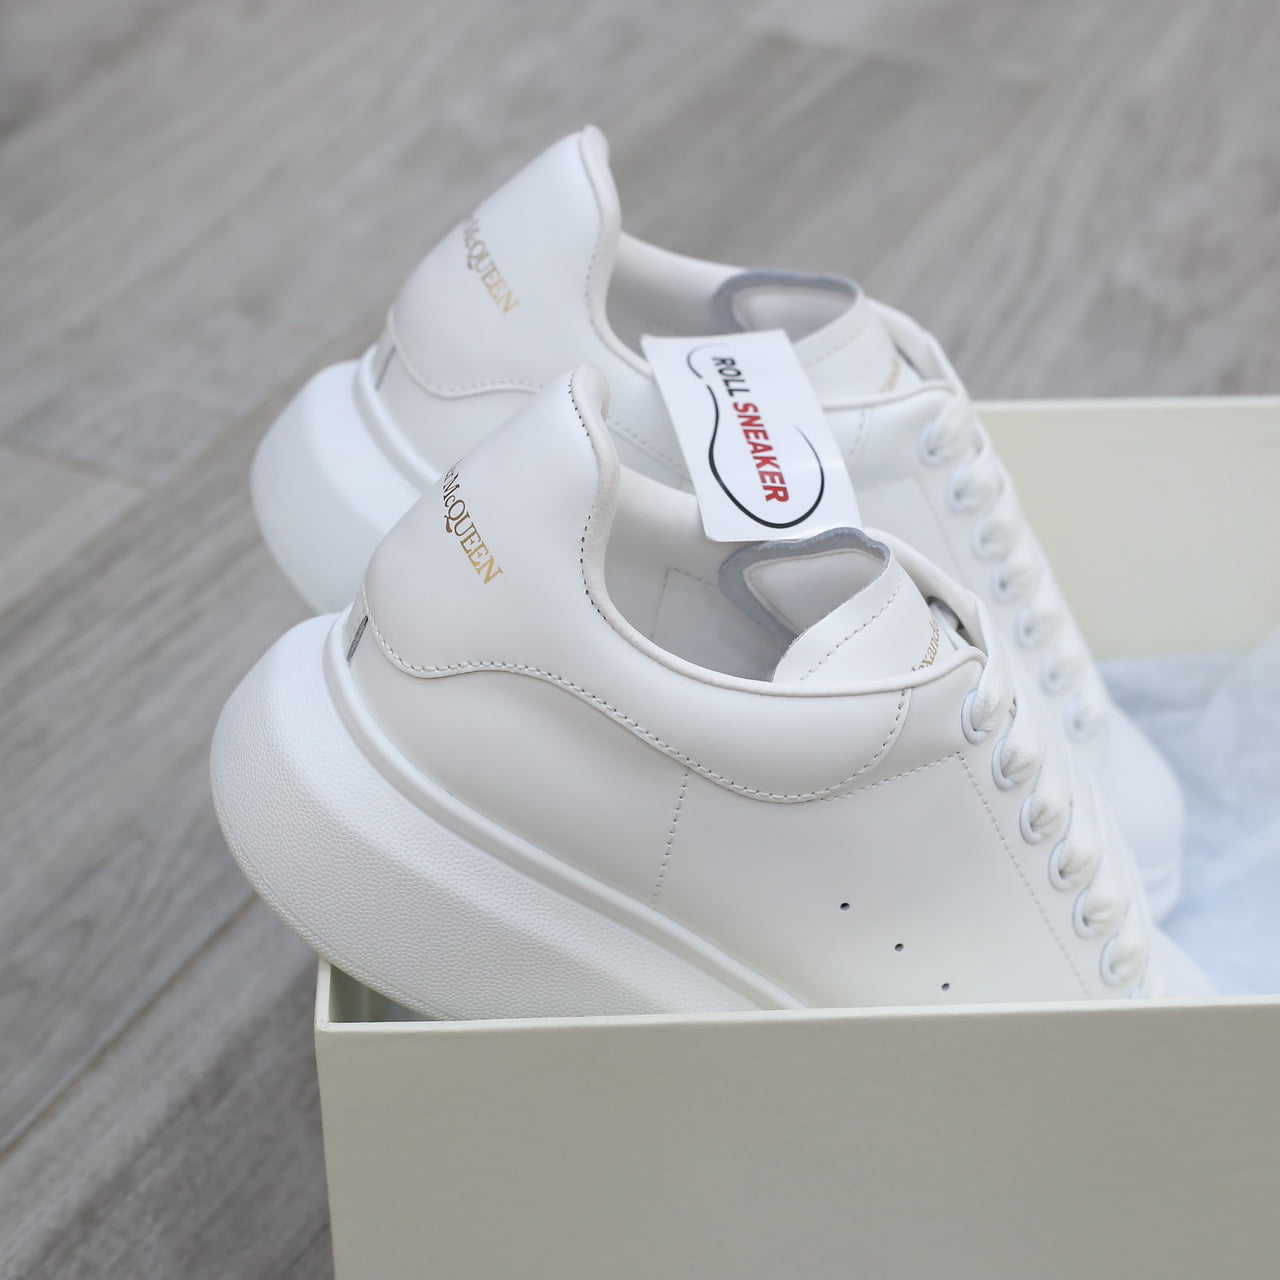 Giày Mcqueen Full White Trắng Like Auth